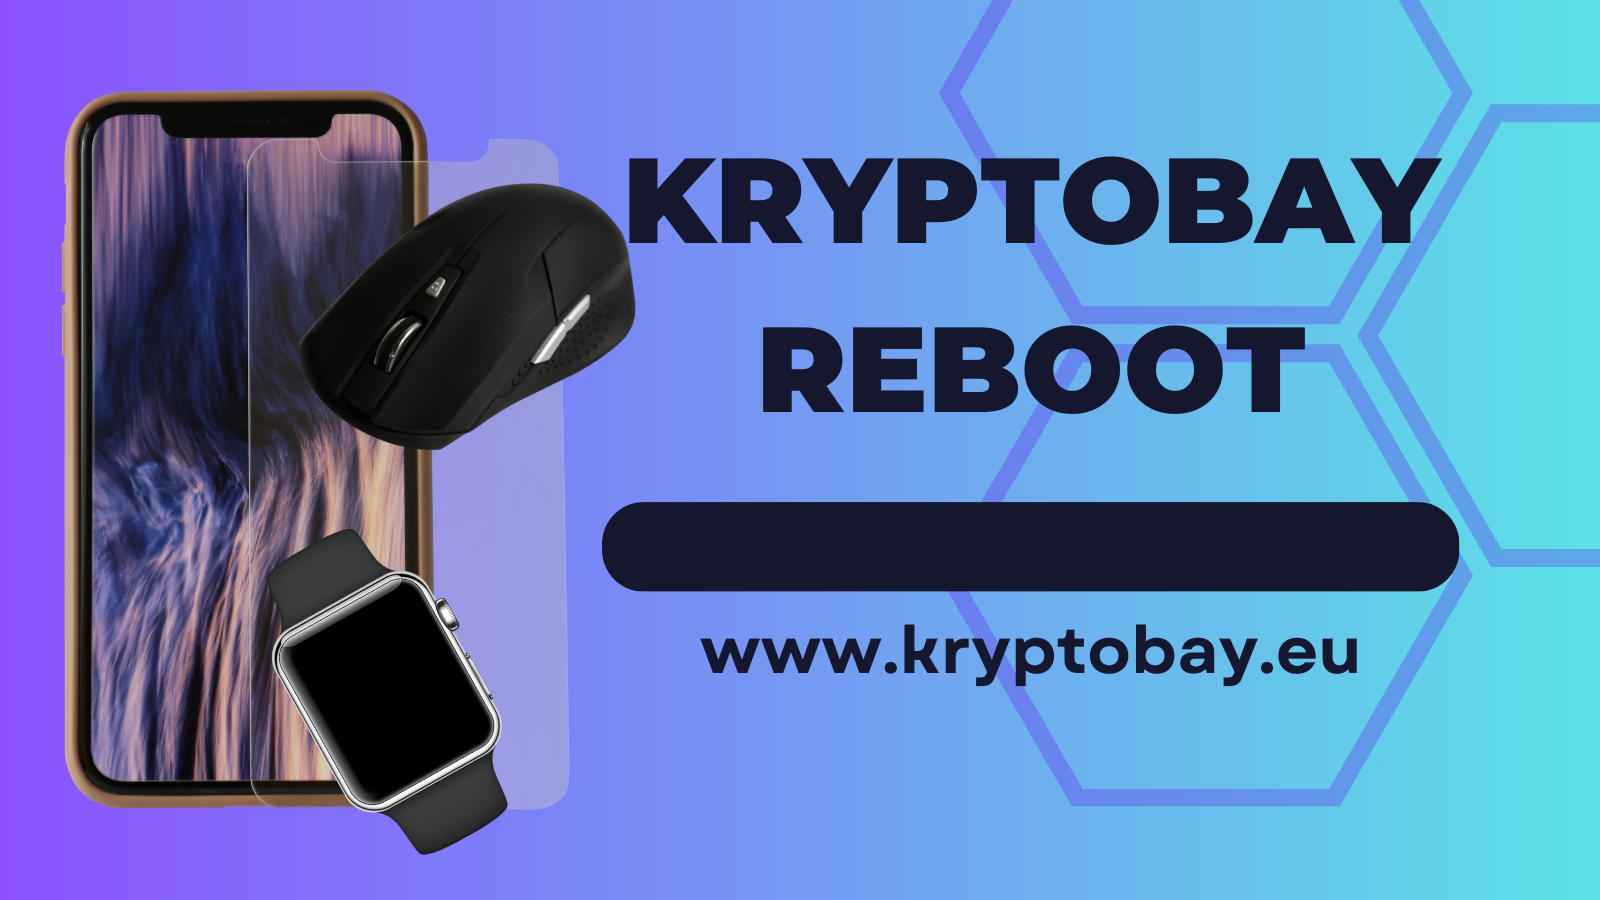 KryptoBay Reboot: Redefined Online Shopping with PARA Token paying